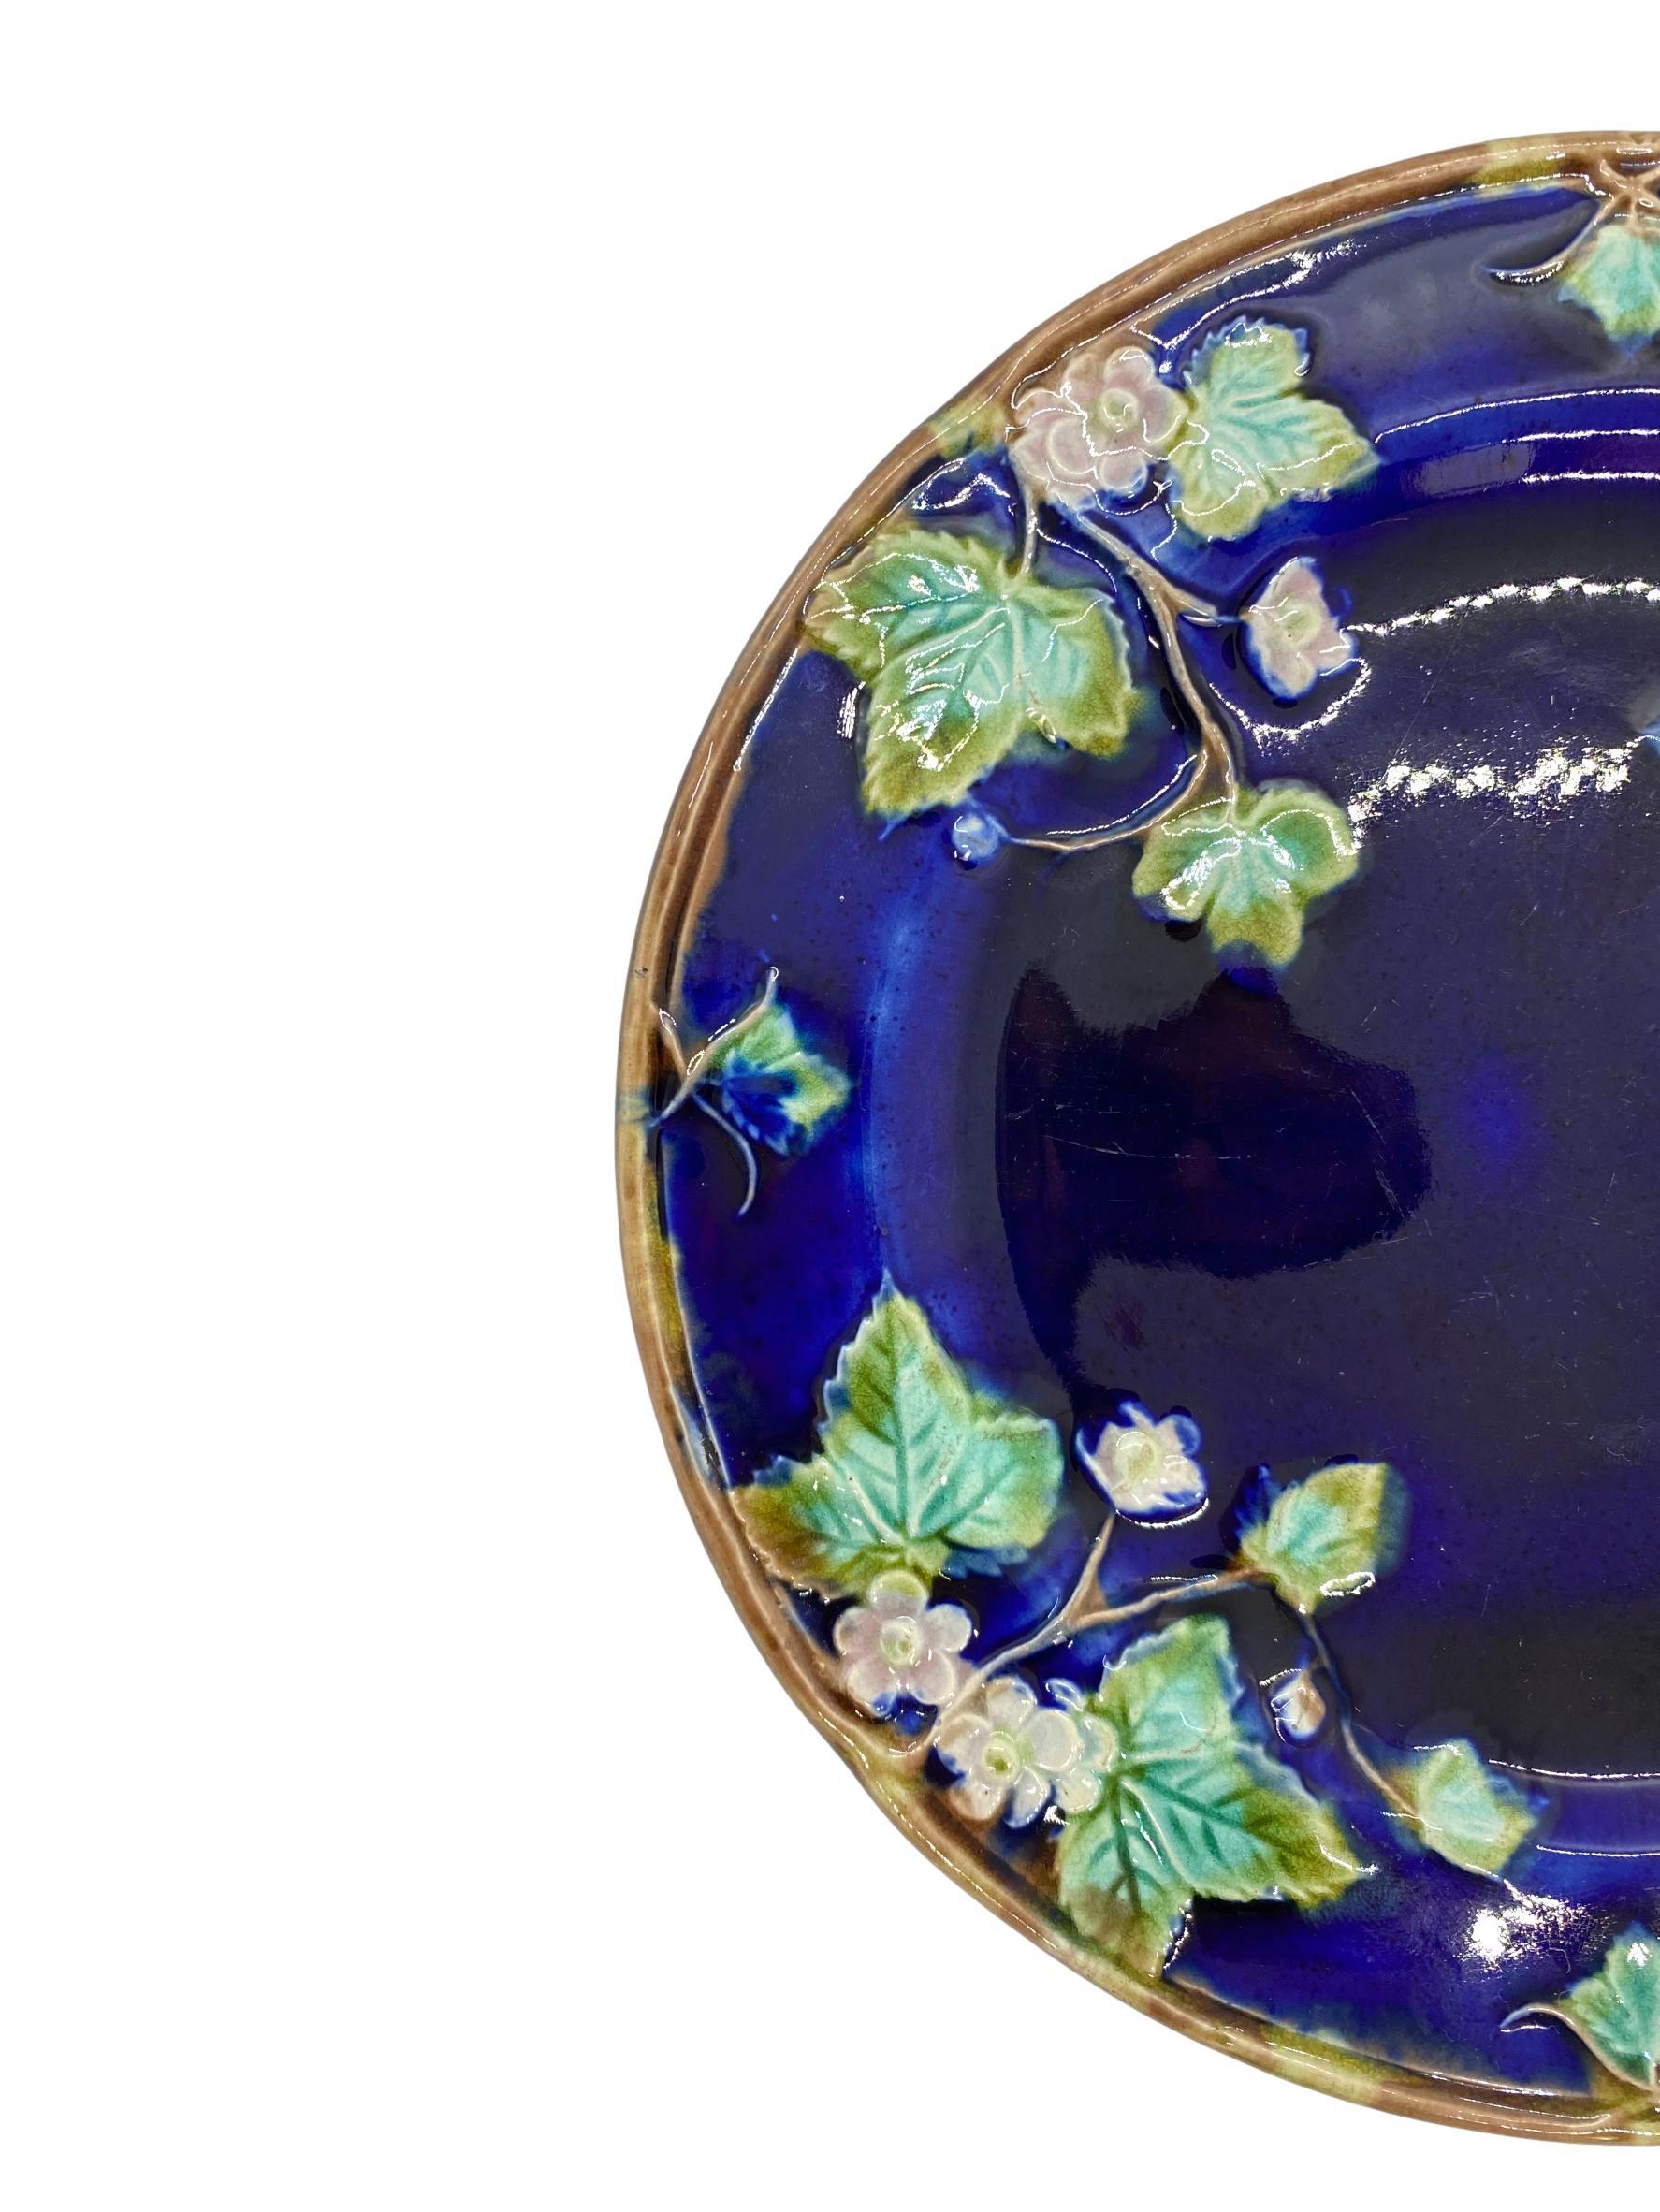 George Jones Majolica plate strawberry blossoms on cobalt ground, ca. 1880, Diameter: 7.5
This design is included in the Karmason Library of the Majolica International Society, I.D. Number: 4388, KL Number: KL002924P. 
For 30 years we have been